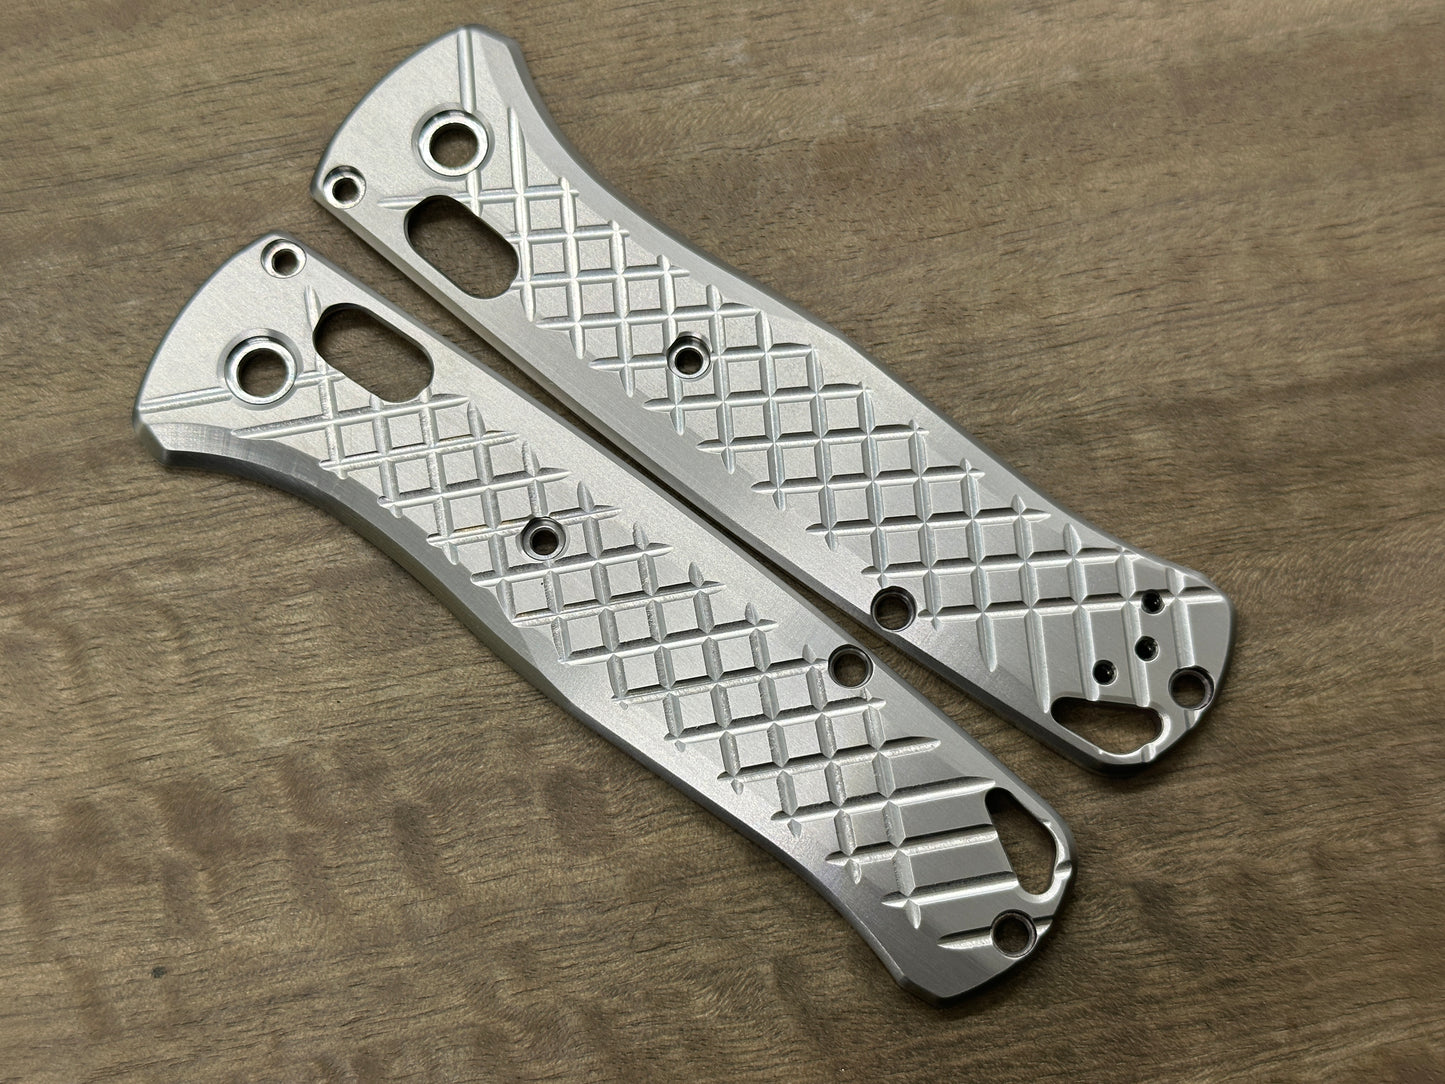 Titanium FRAG Cnc milled Scales for Benchmade Bugout 535